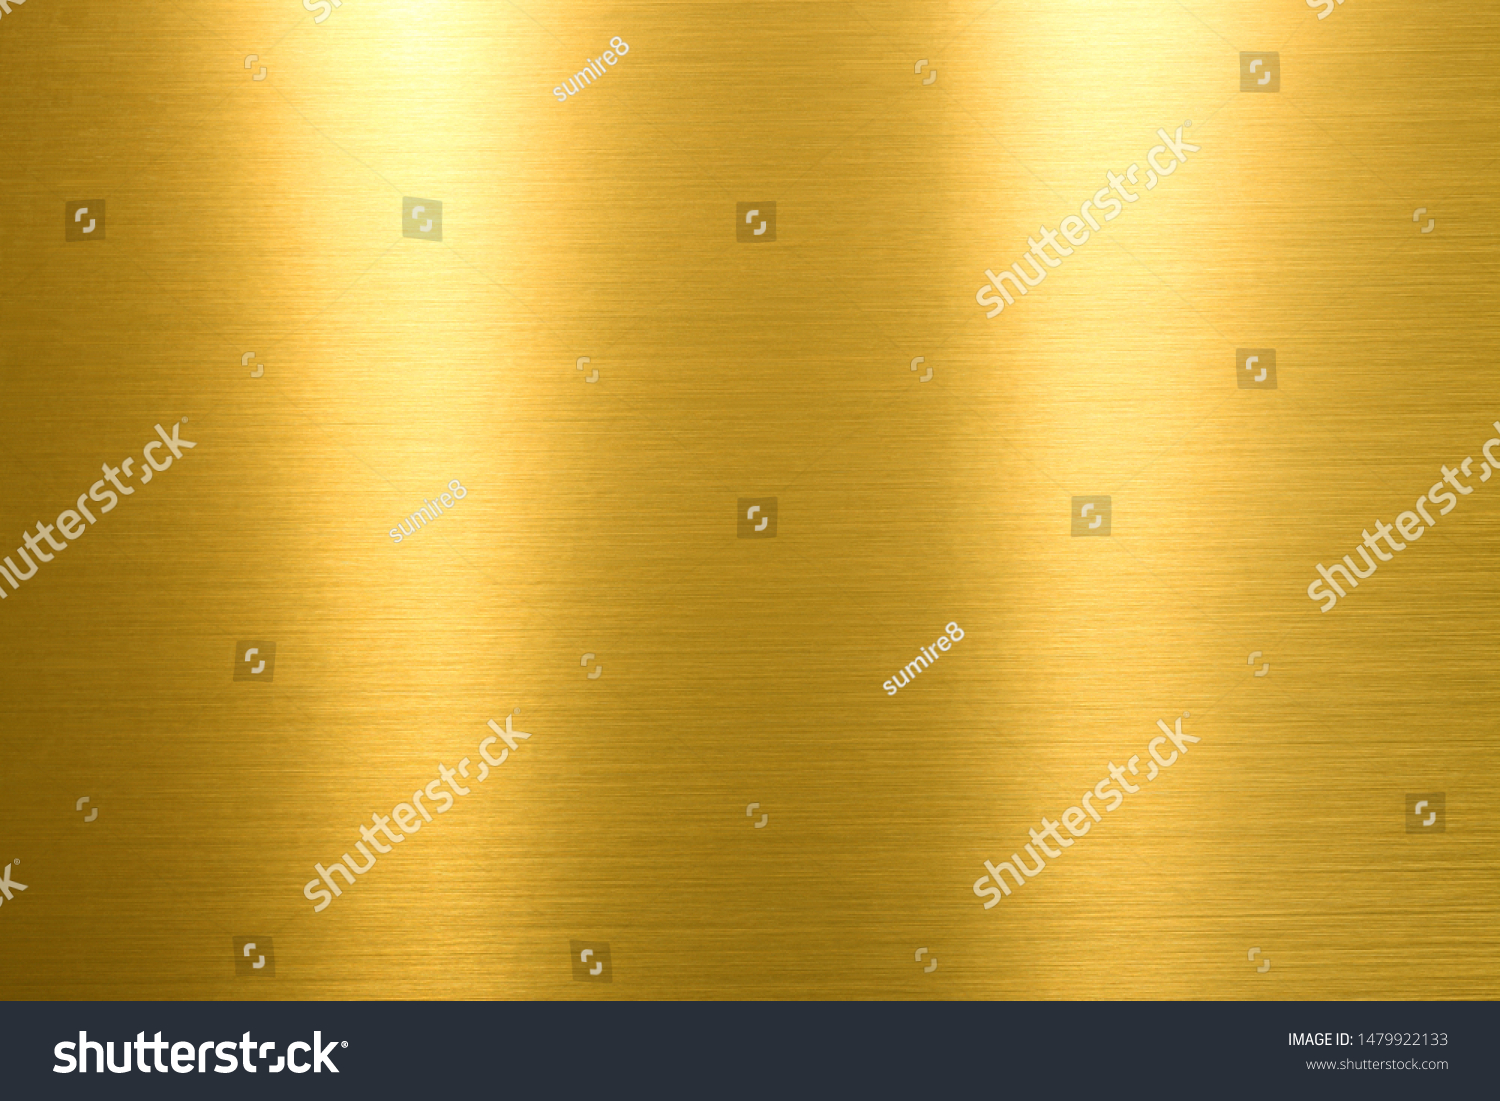 Gold background. Rough golden texture. Luxurious gold paper template for your design. #1479922133